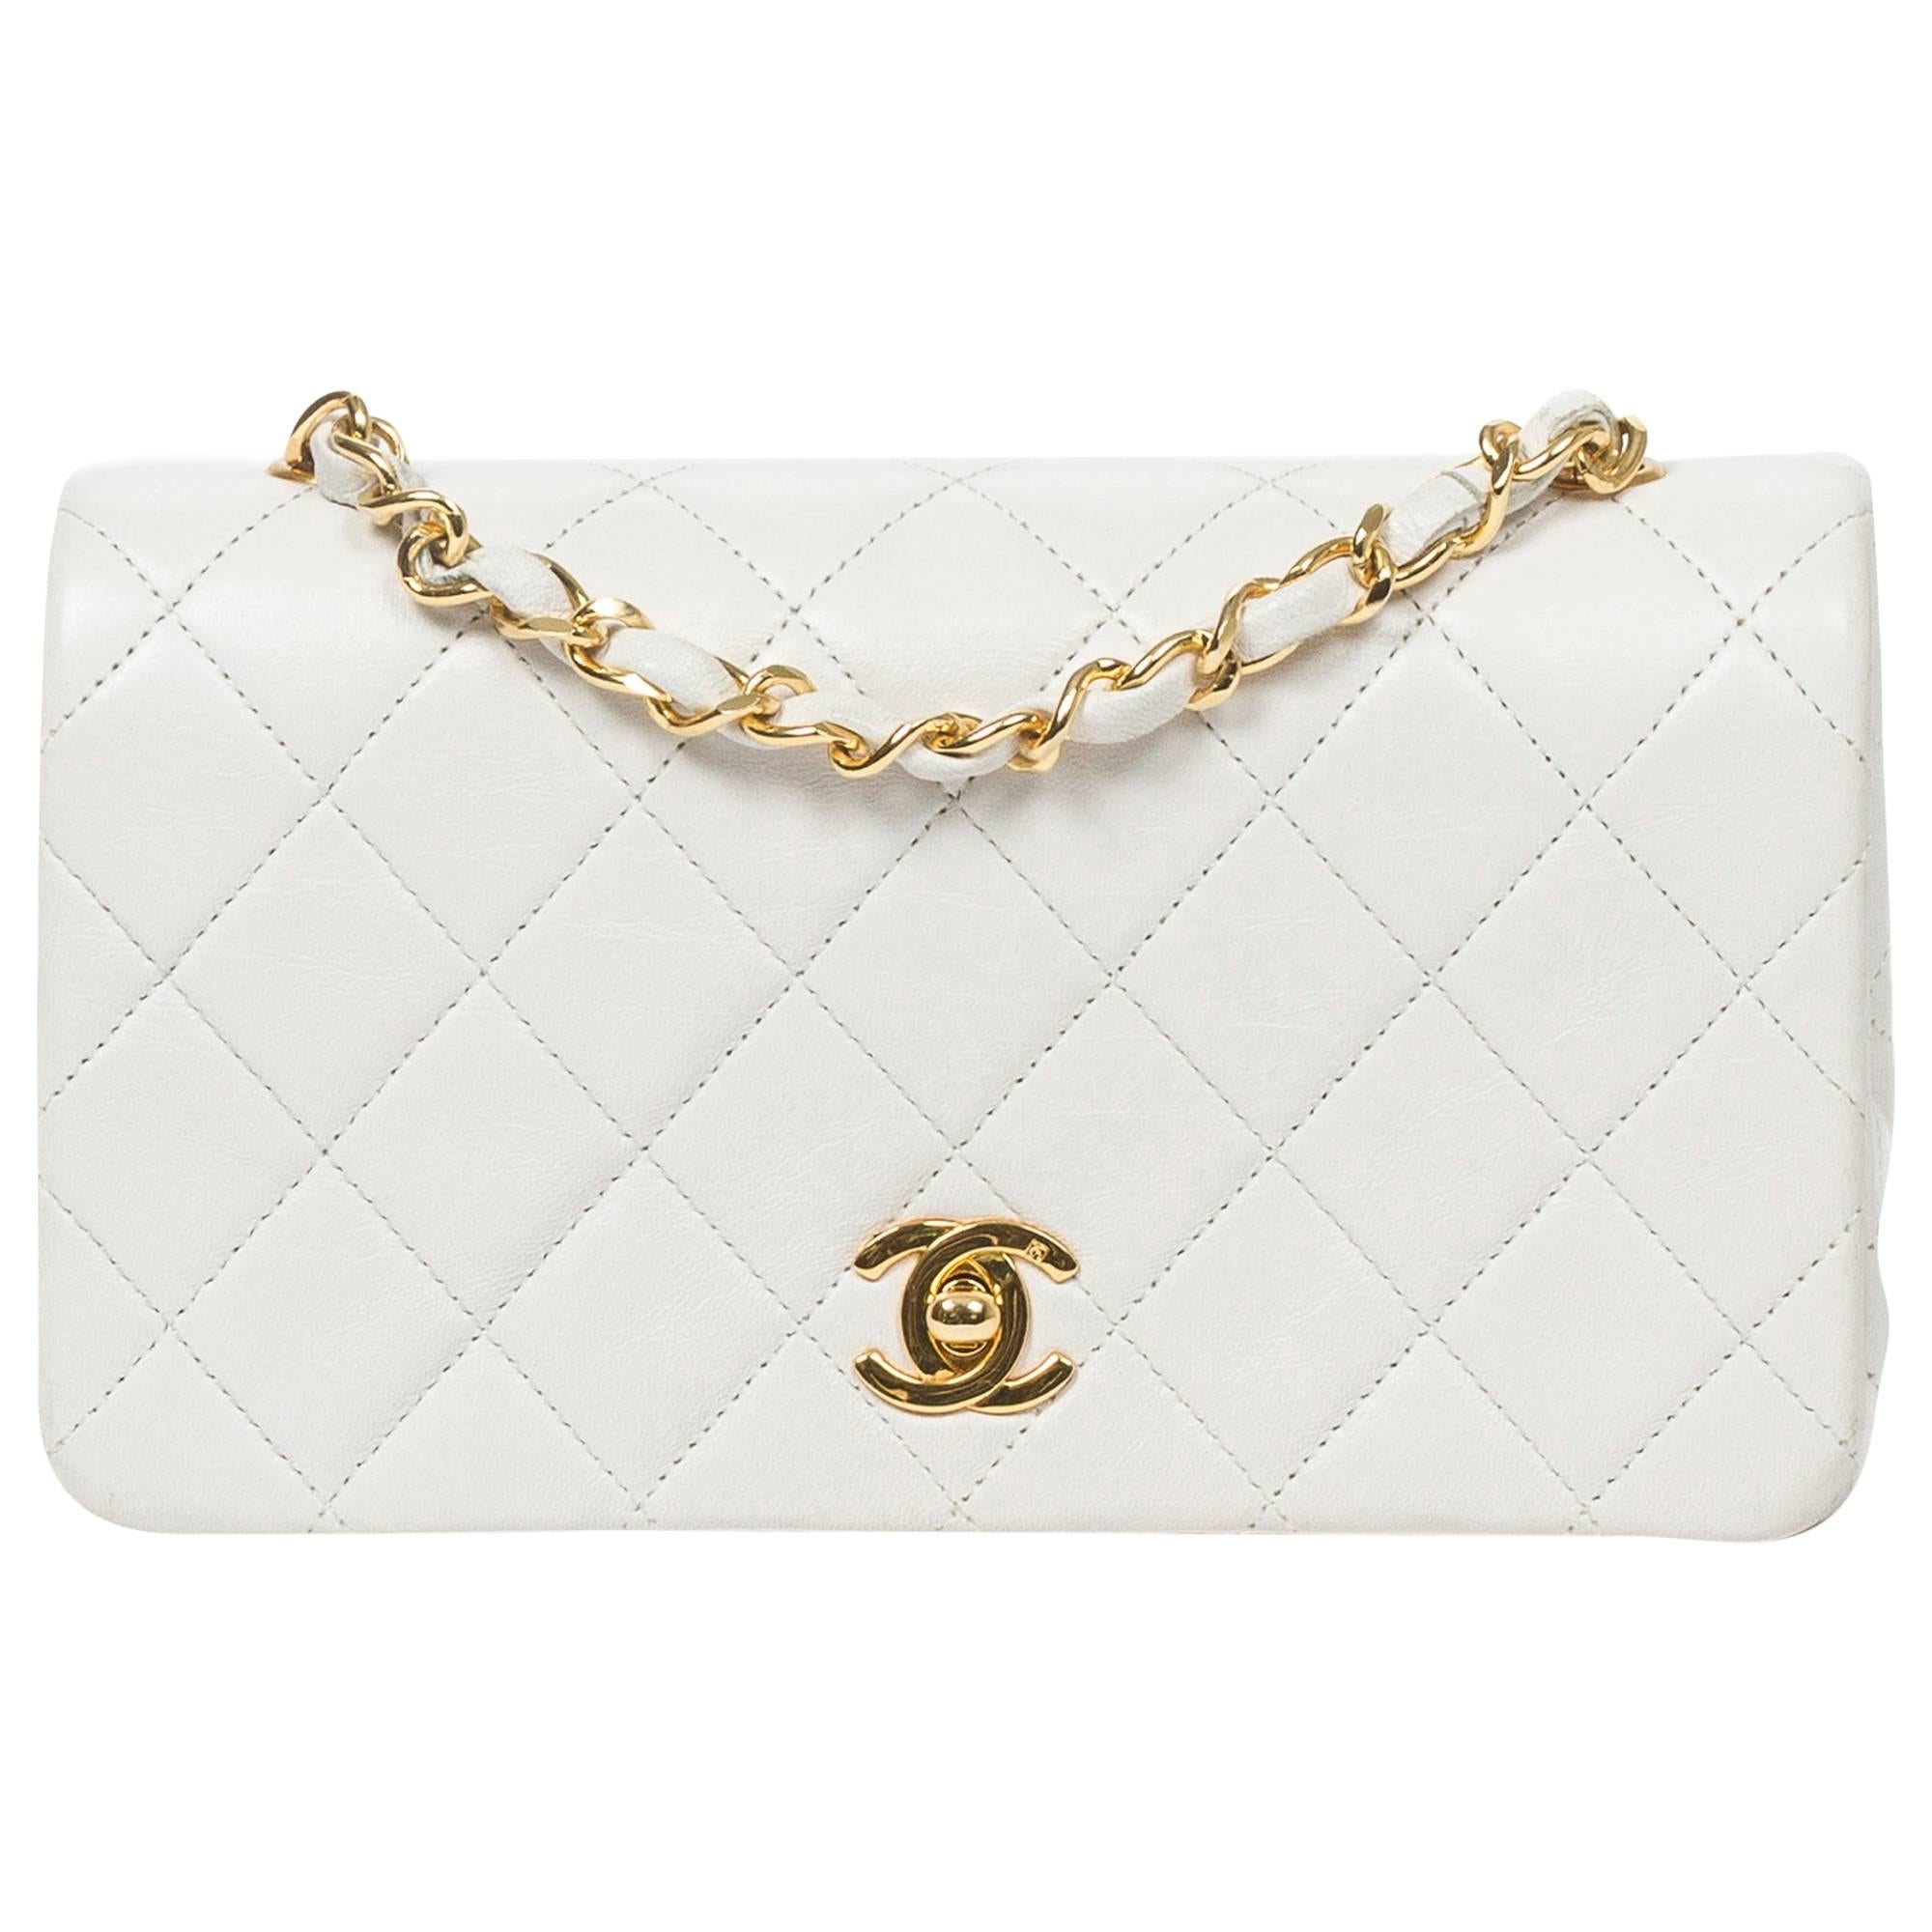 Chanel - Vintage Full Flap Bag White Quilted Leather